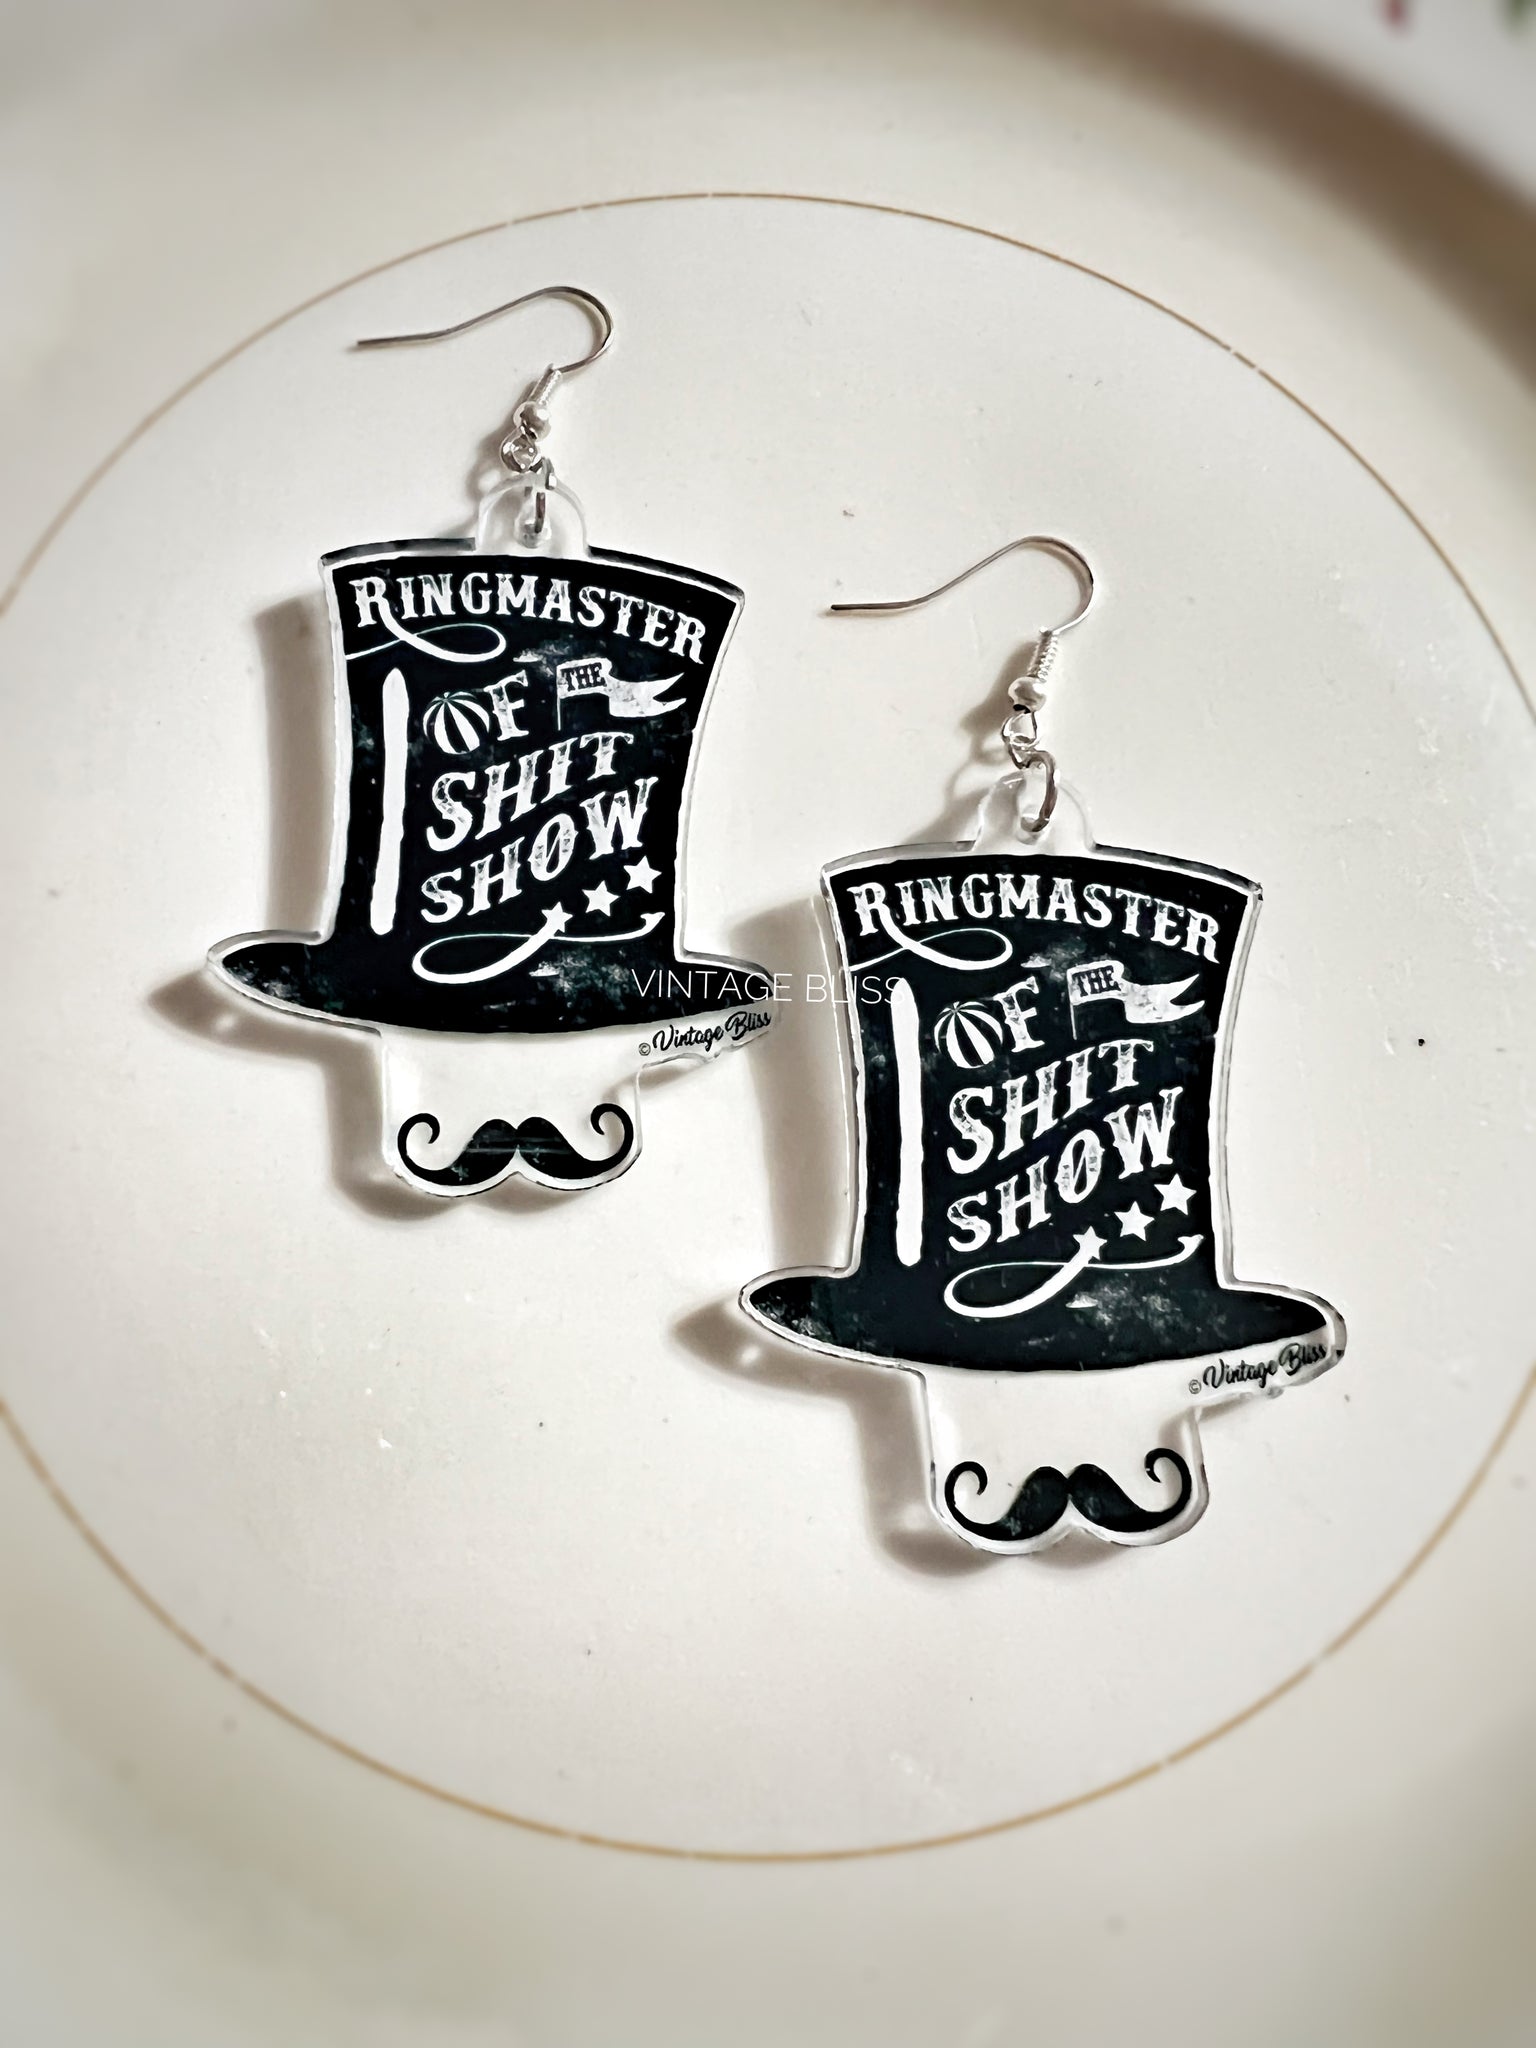 Ringmaster of the ShitShow Earrings